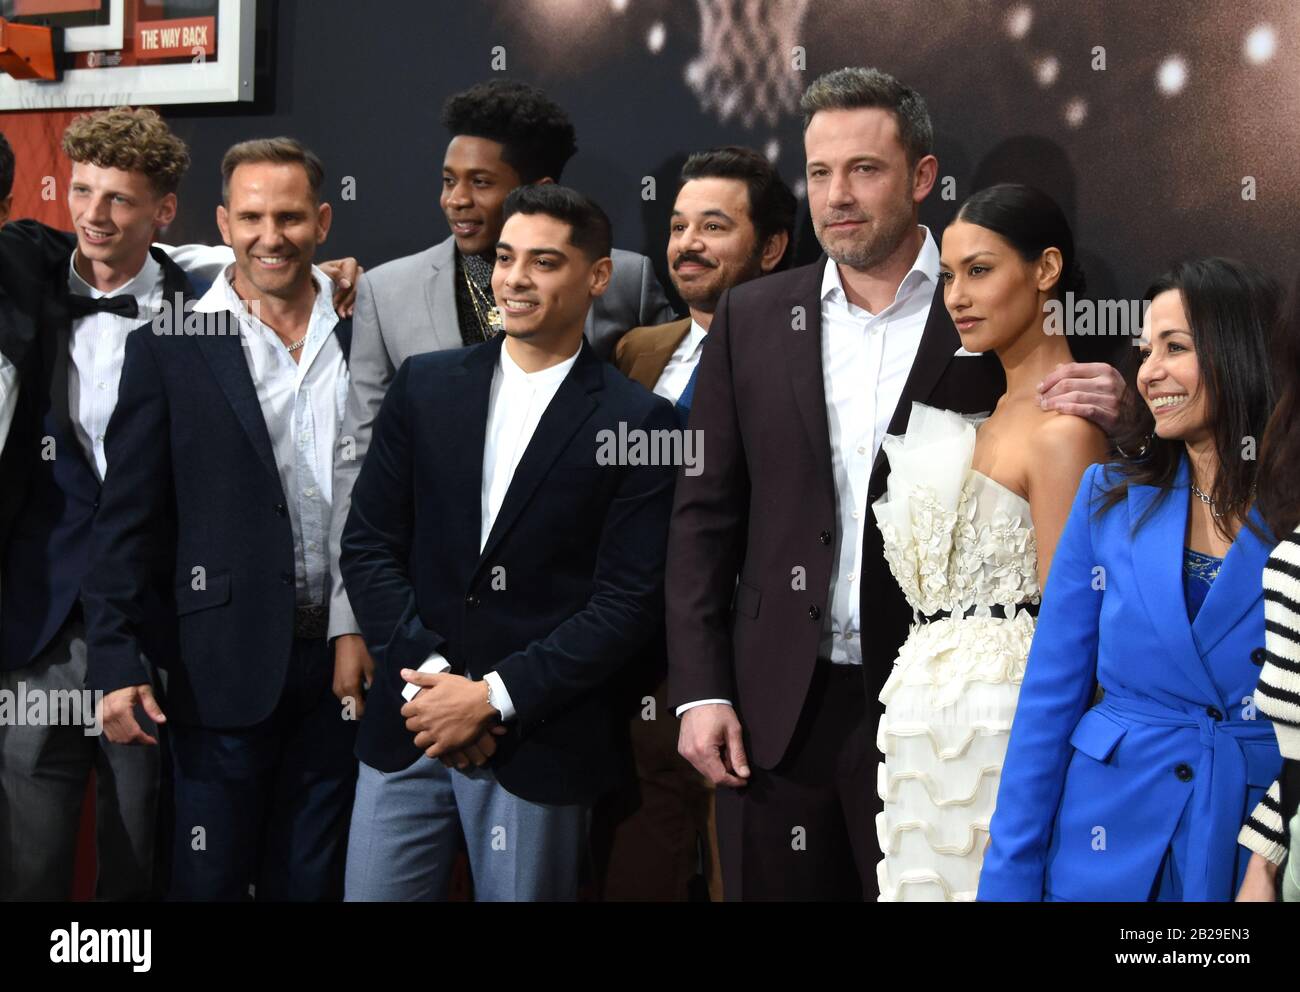 Los Angeles, California, USA 1st March 2020 (L-R) Actor Tyler O'Malley, actor Chris Bruno, actor Melvin Gregg, actor Fernando Luis Vega, actor Al Madrigal, actor Ben Affleck, and actress Janina Gavankar attend Warner Bros. Pictures 'The Way Back' World Premiere on March 1, 2020 at Regal LA Live in Los Angeles, California, USA. Photo by Barry King/Alamy Live News Stock Photo